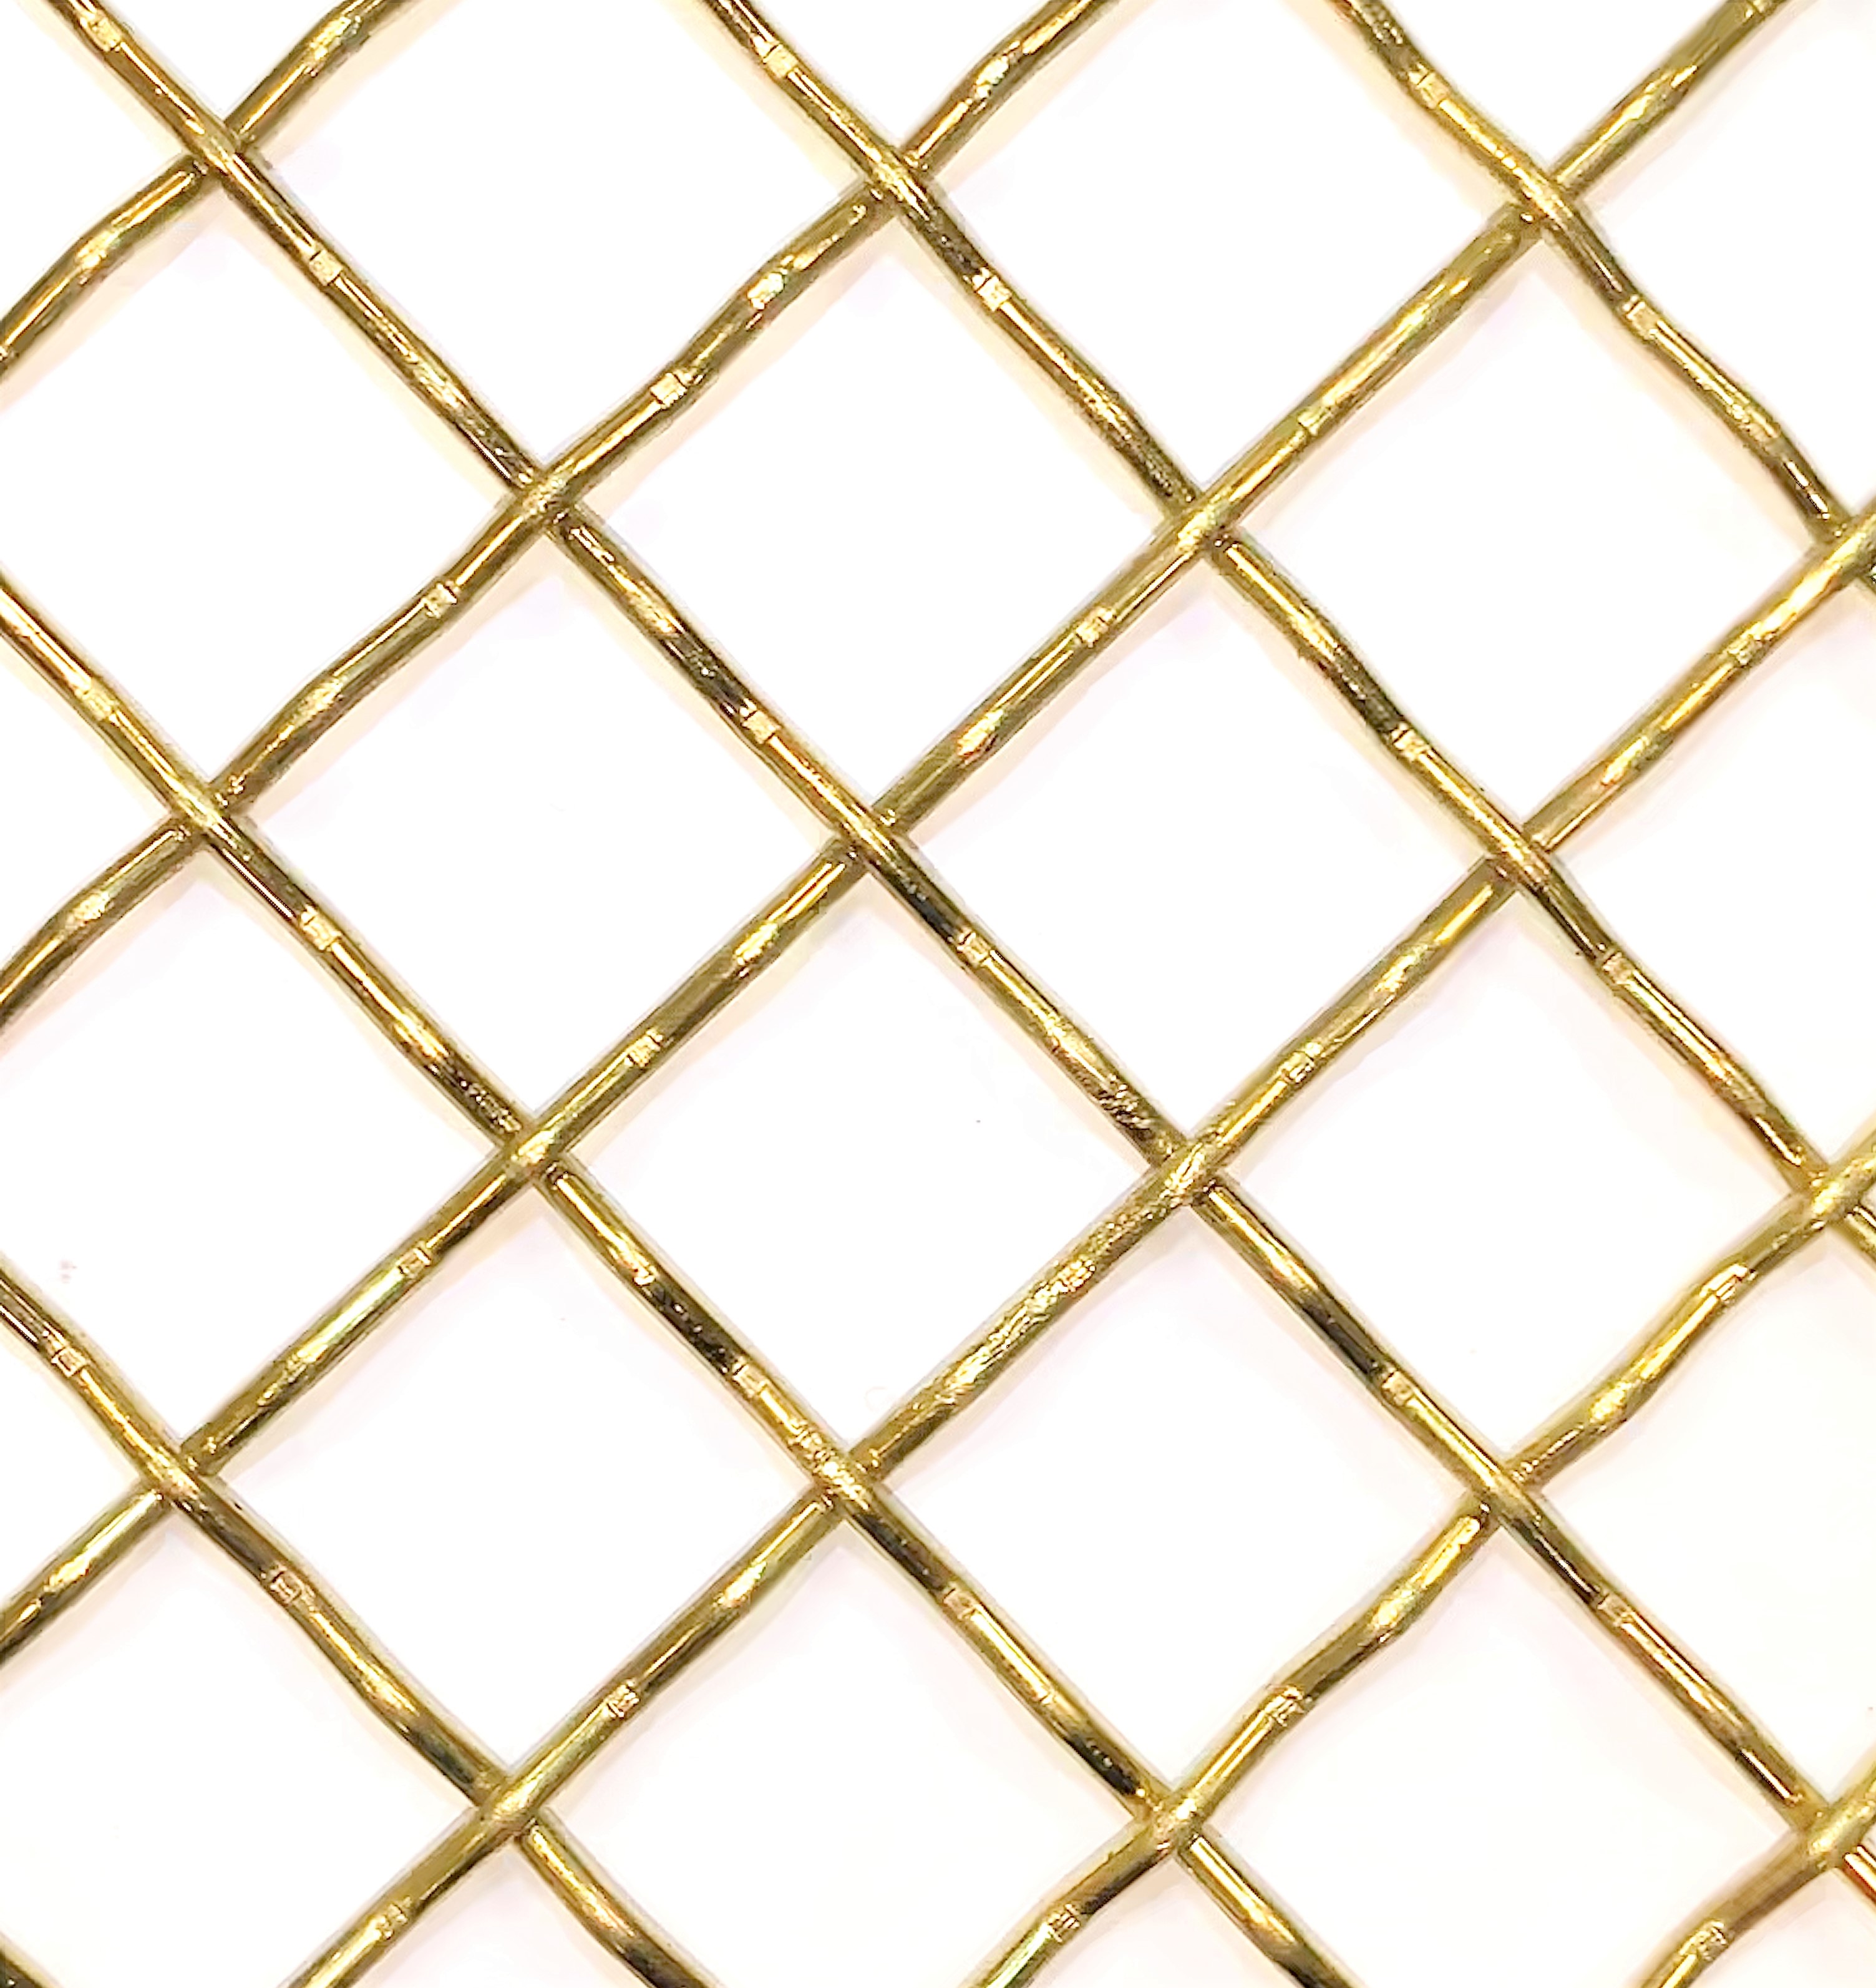 Brass Woven Wire Mesh - By Opening Size: From 0.215 to 0.0603 On Edward  J. Darby & Son, Inc.